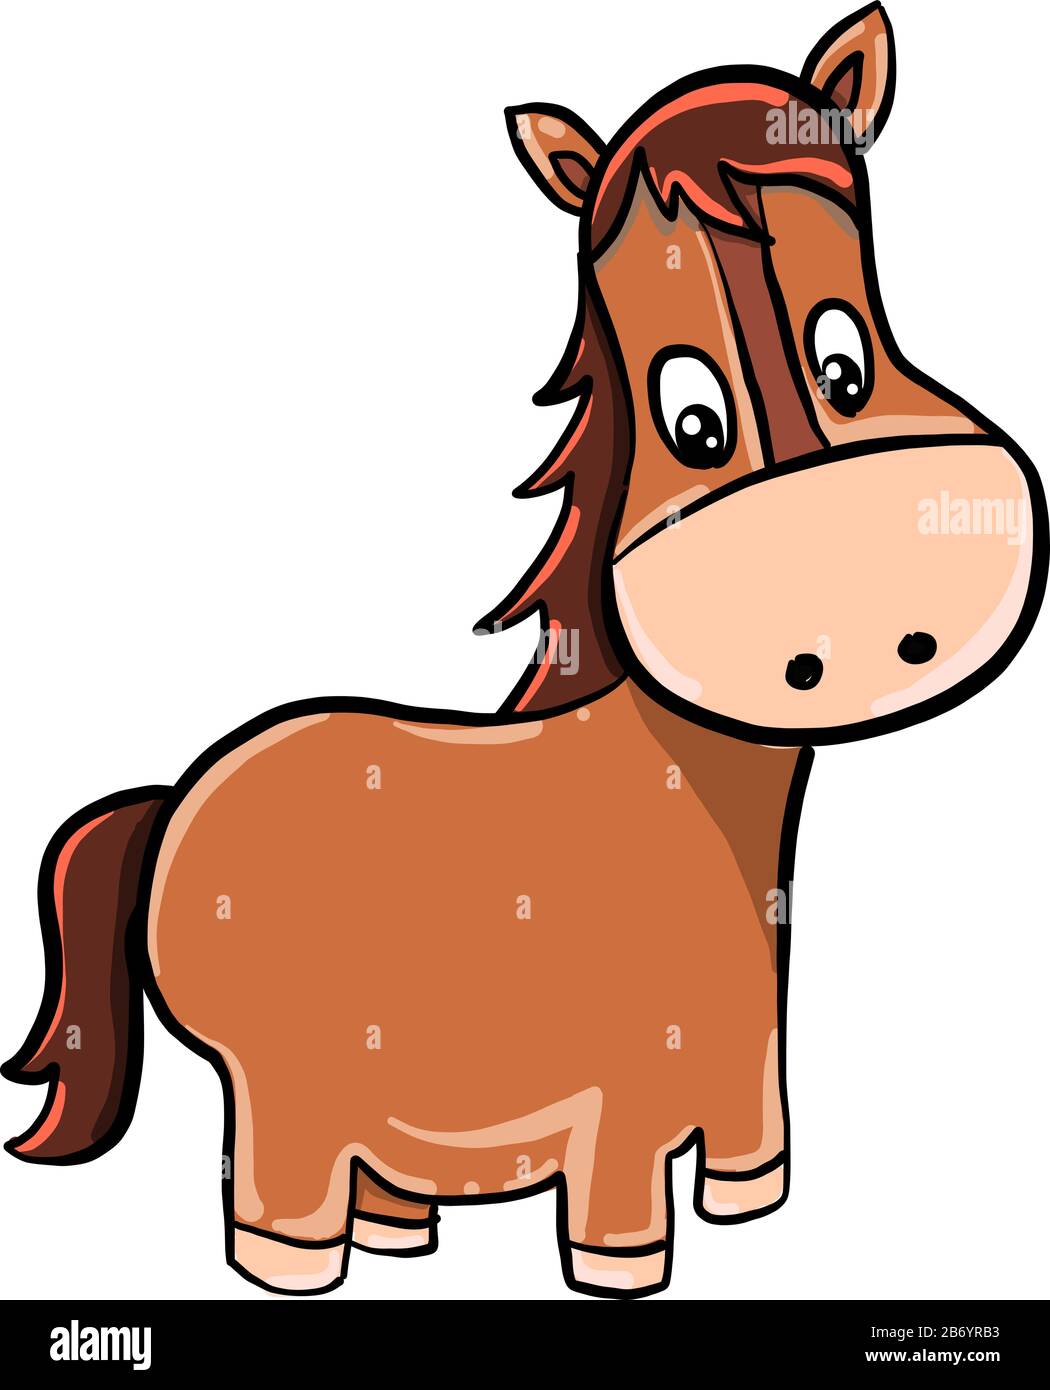 Small horse, illustration, vector on white background Stock Vector ...